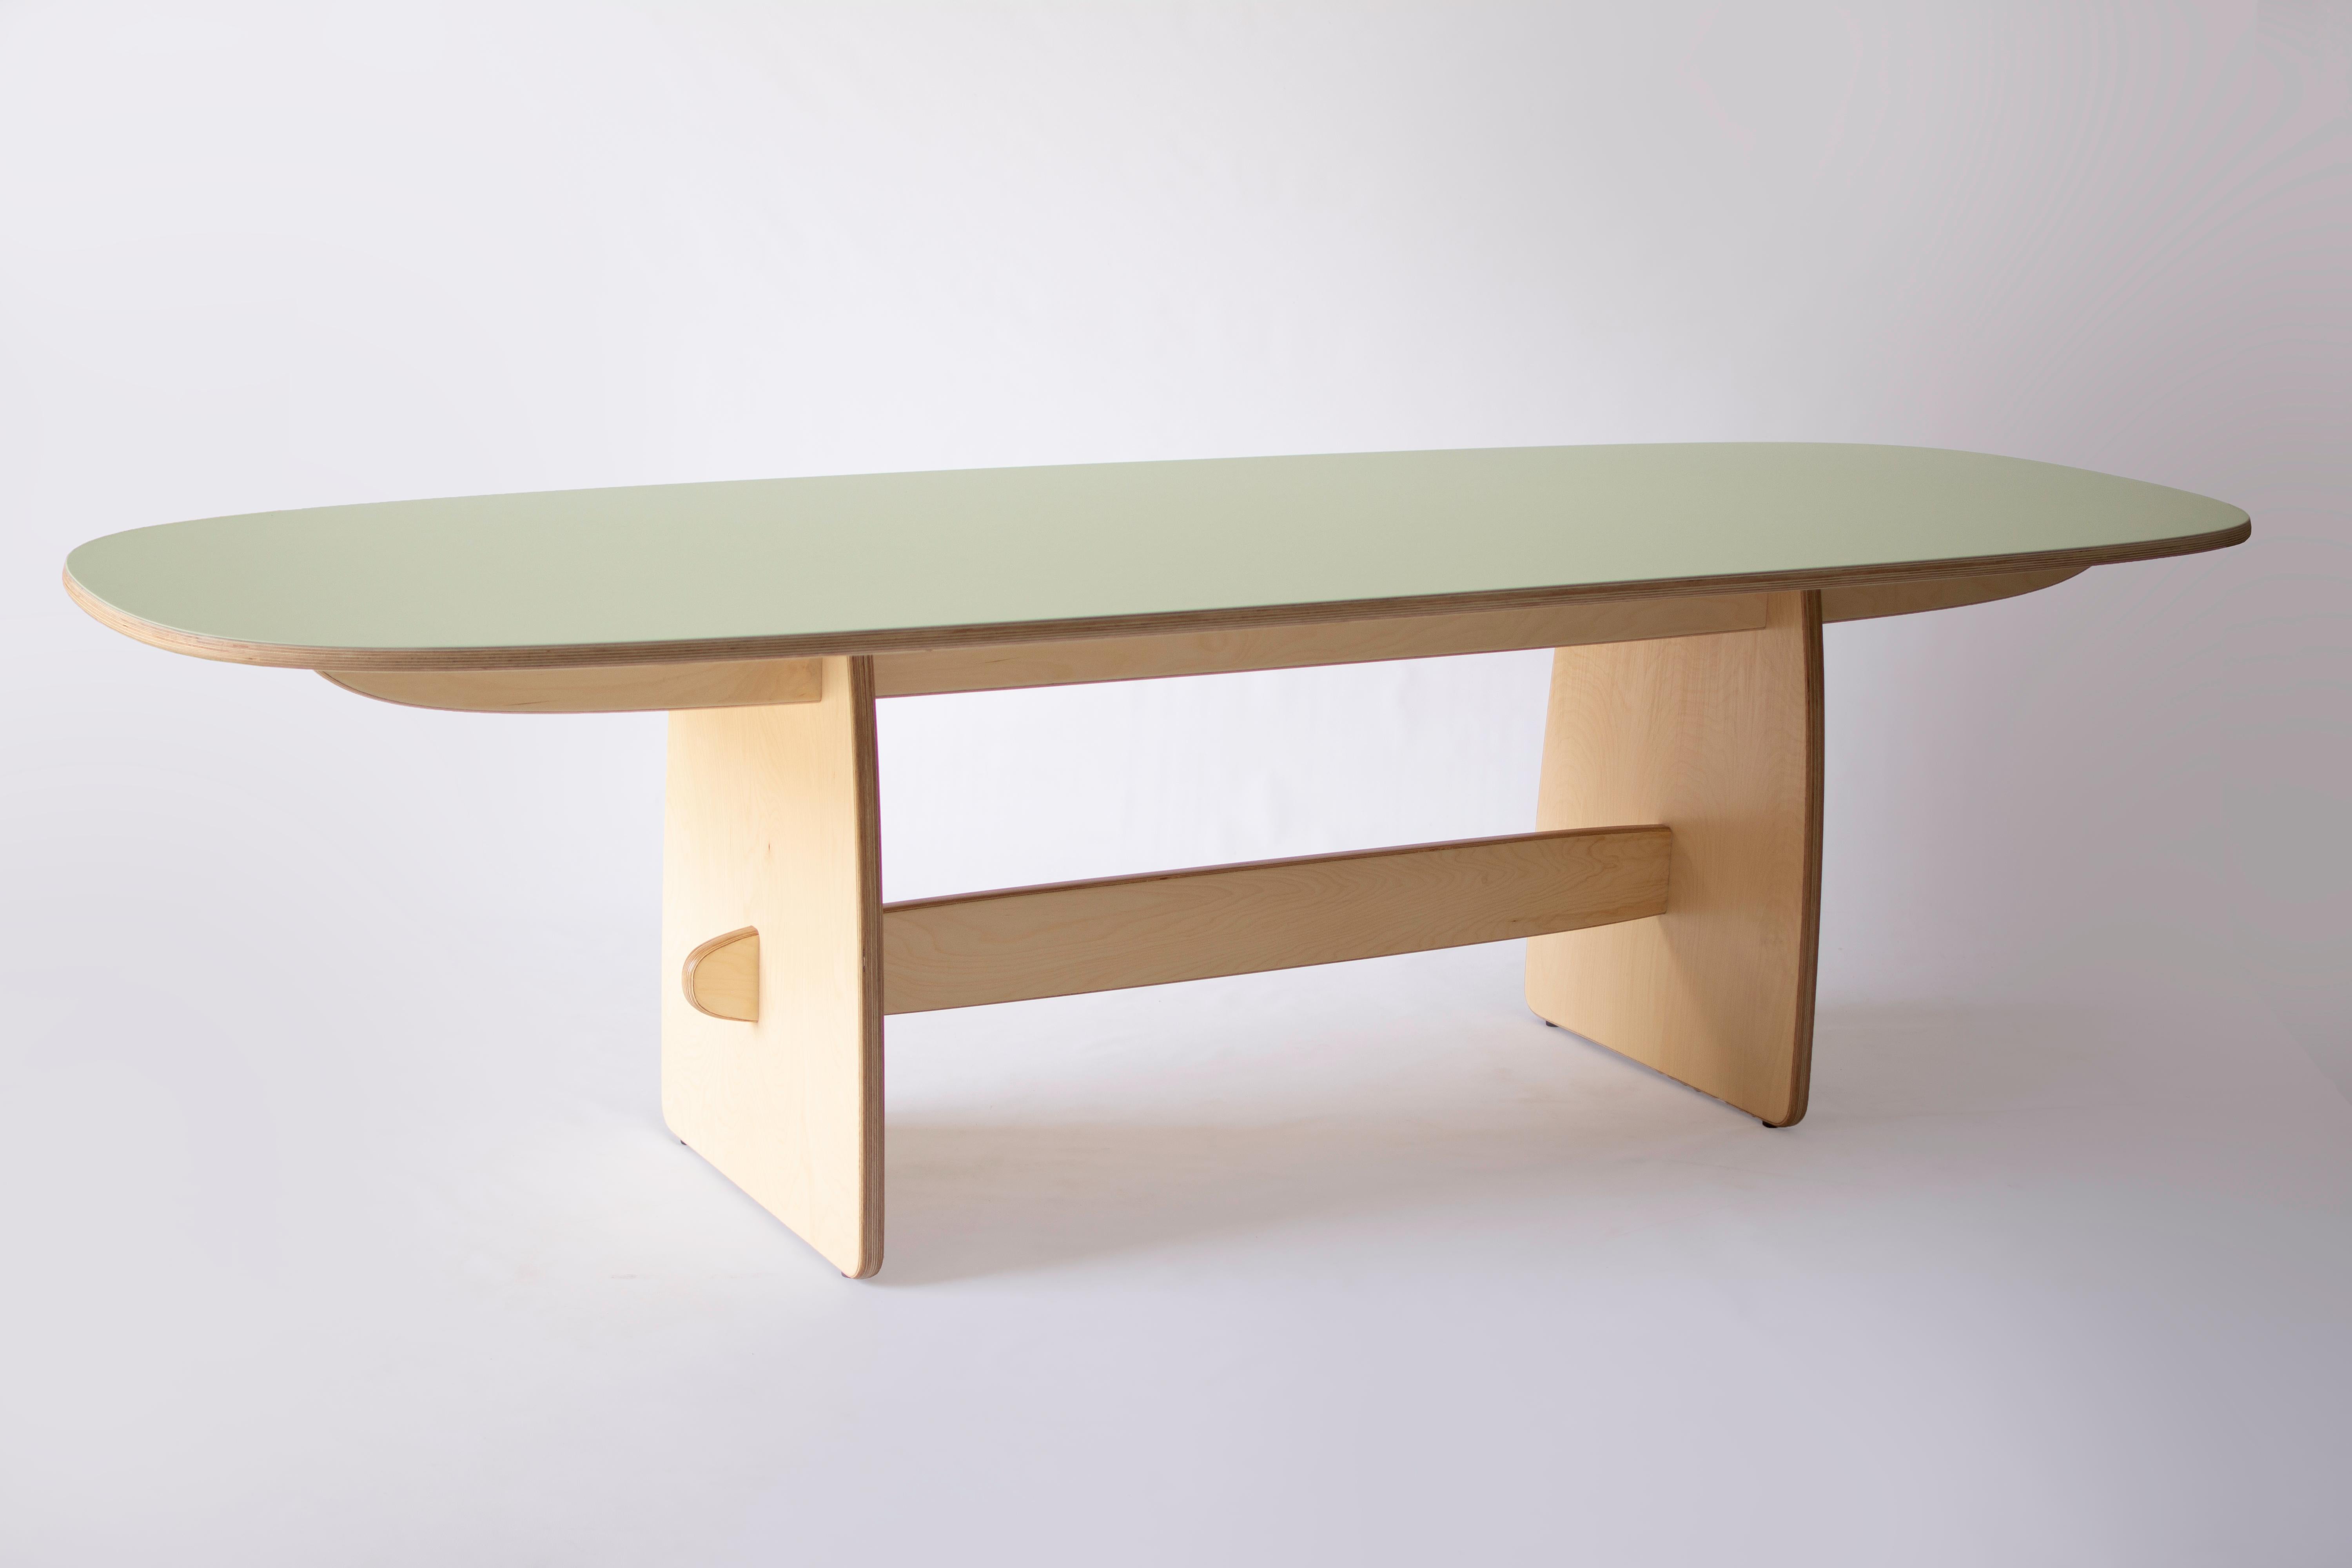 baltic birch plywood table